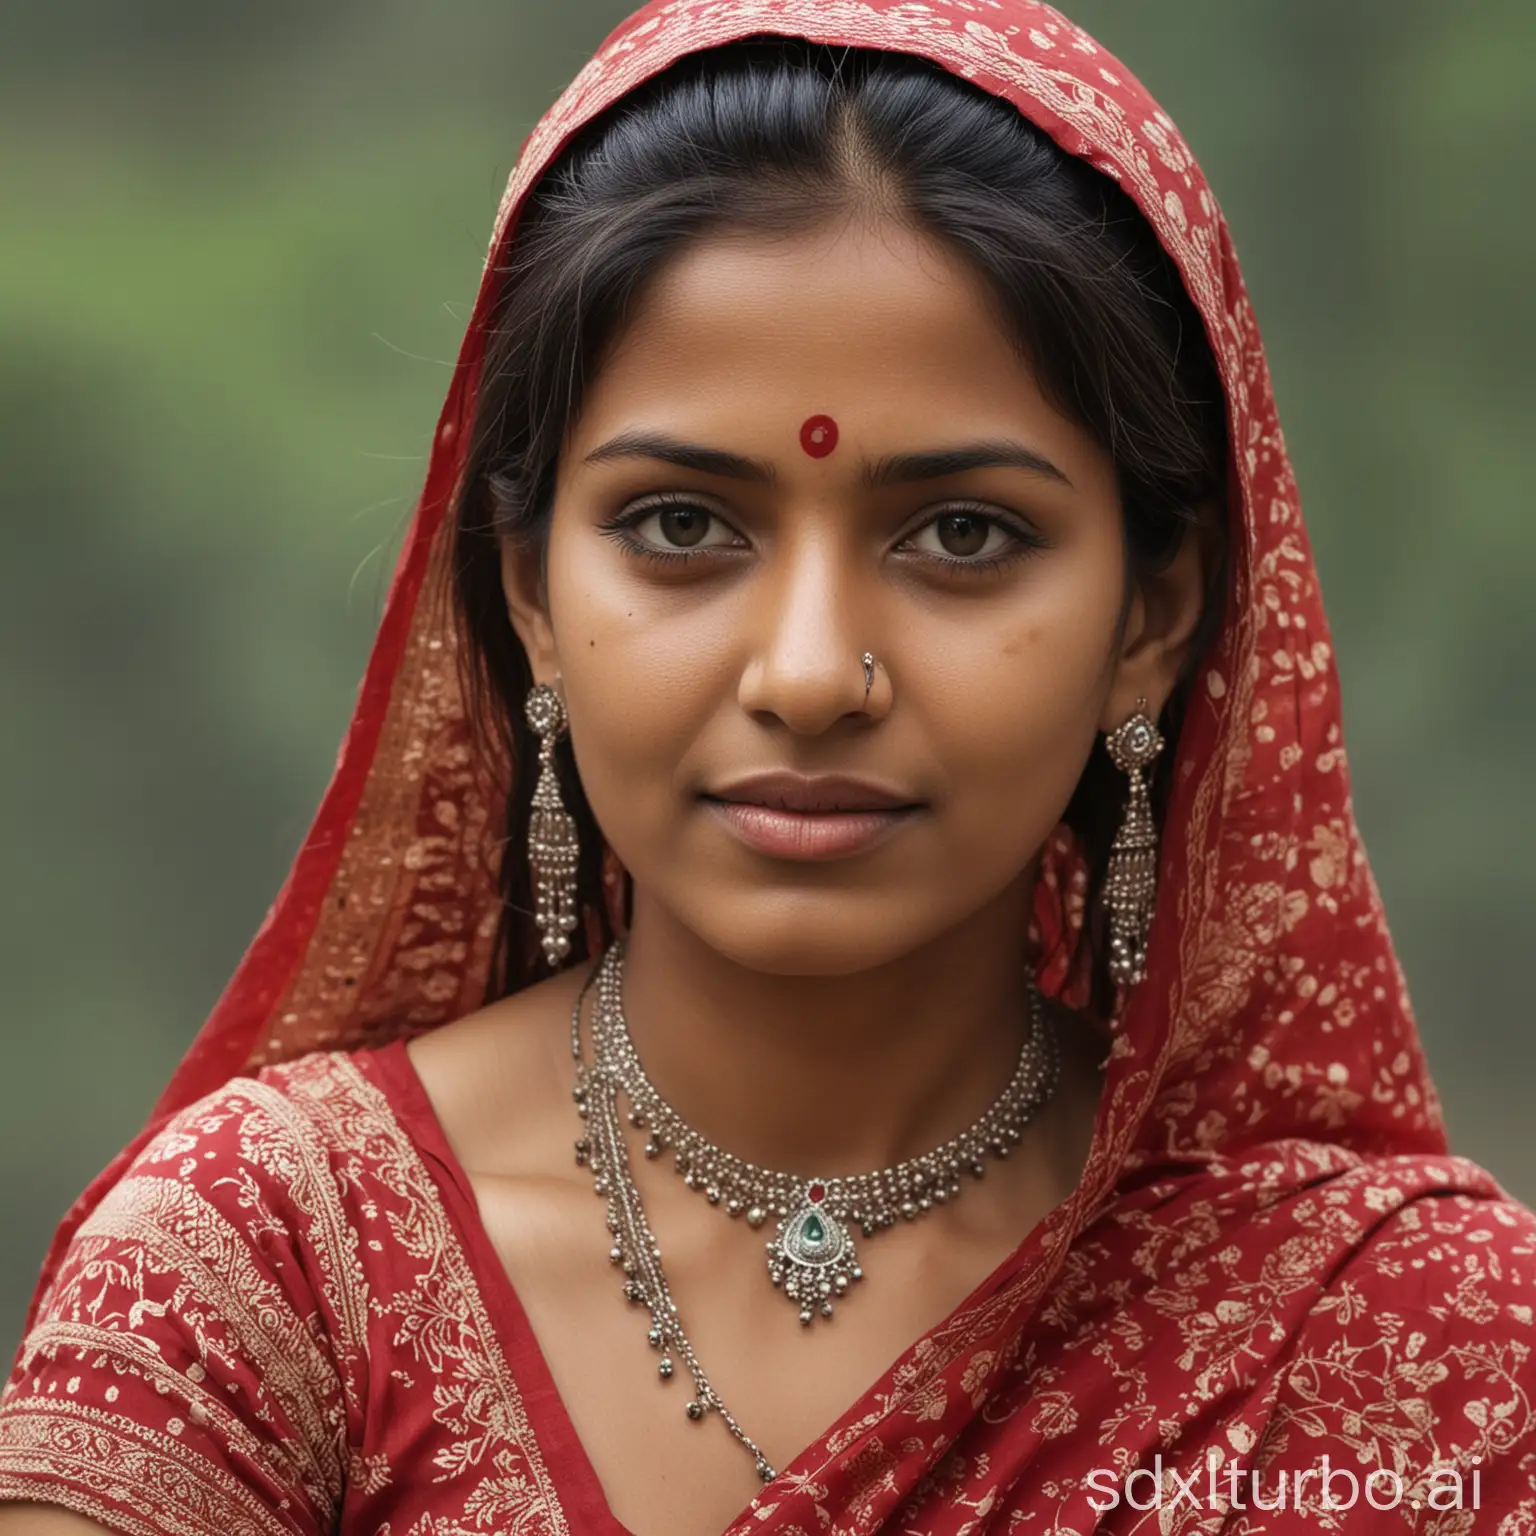 Traditional-Indian-Woman-in-Colorful-Sari-and-Ornate-Jewelry